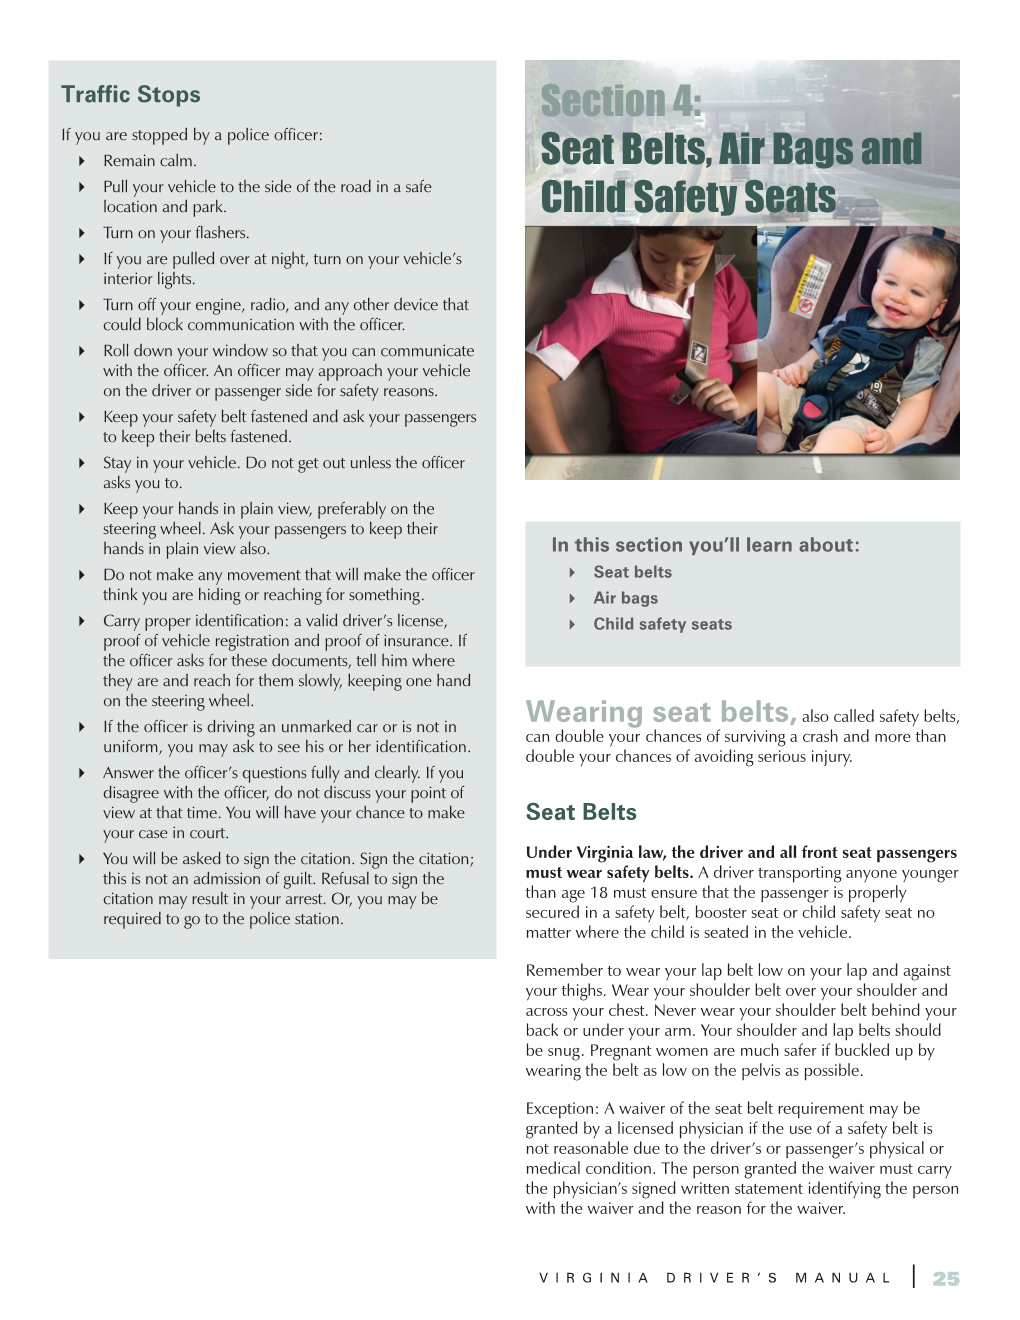 Section 4: Seat Belts, Air Bags and Child Safety Seats